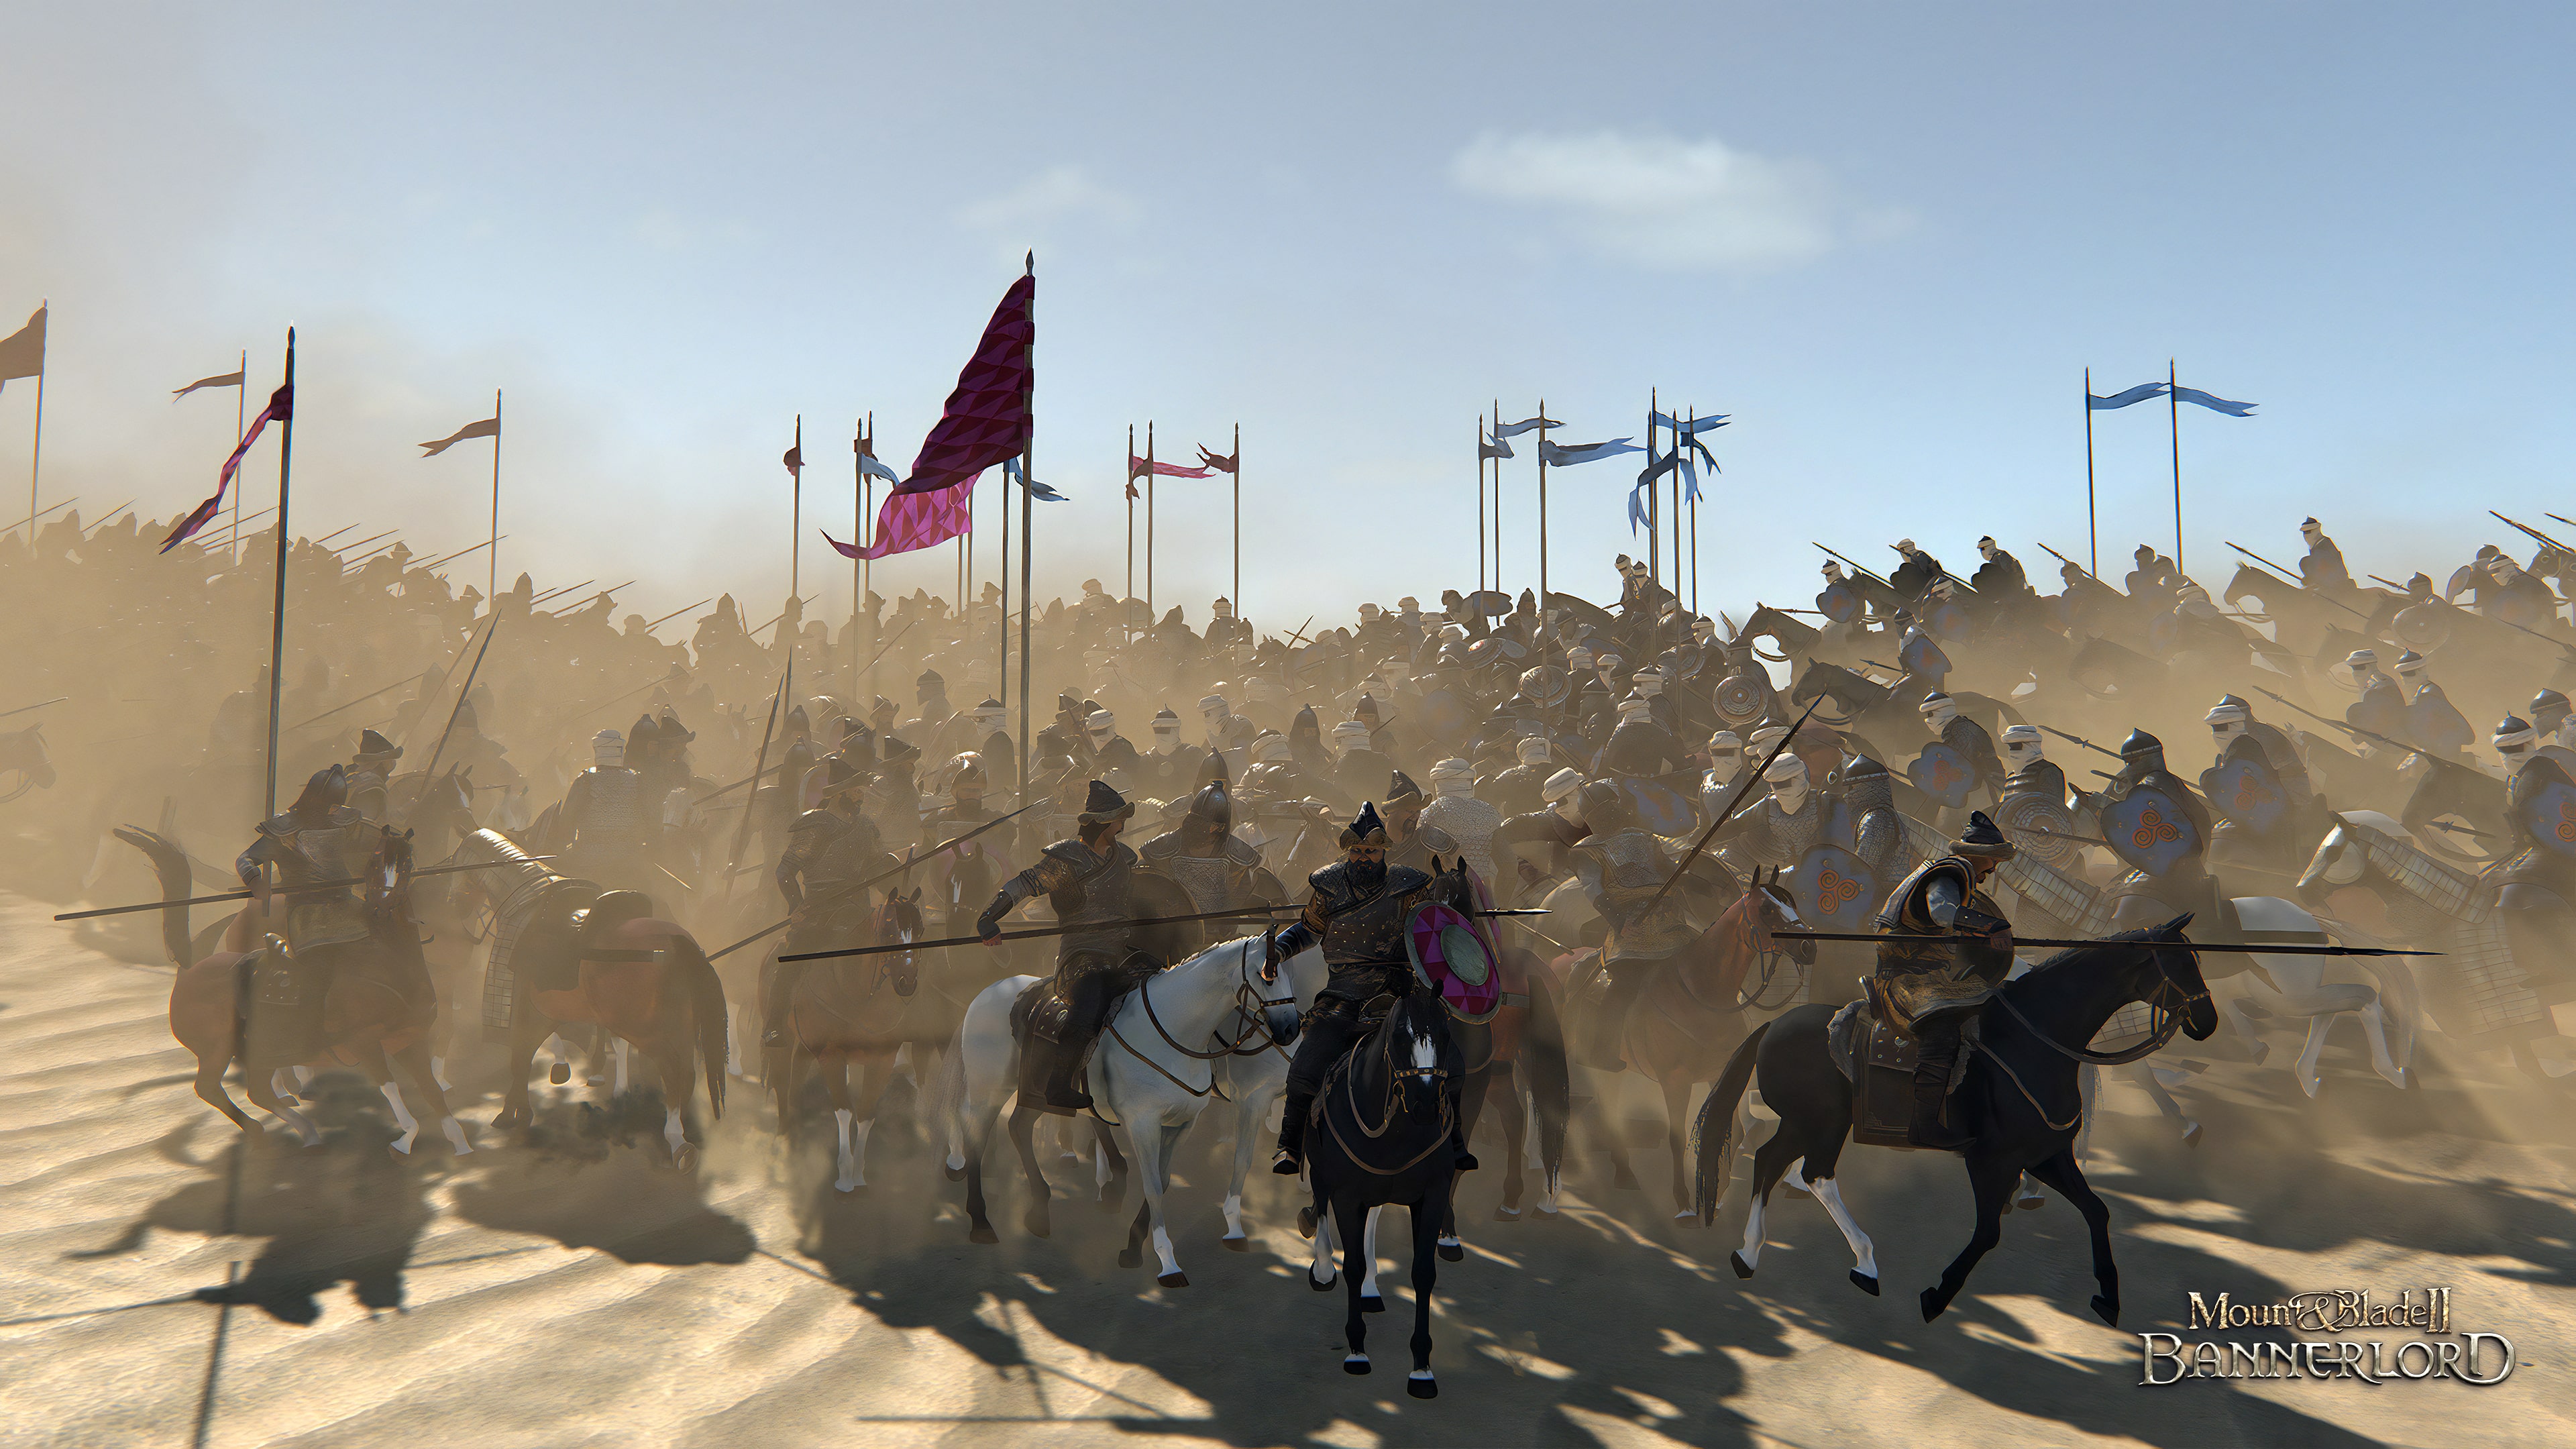 Warband bannerlord. Mount & Blade 2: Bannerlord 2020. Баннерлорд 1. Mount and Blade Bannerlord. Mount and Blade 2 Bannerlord битва.